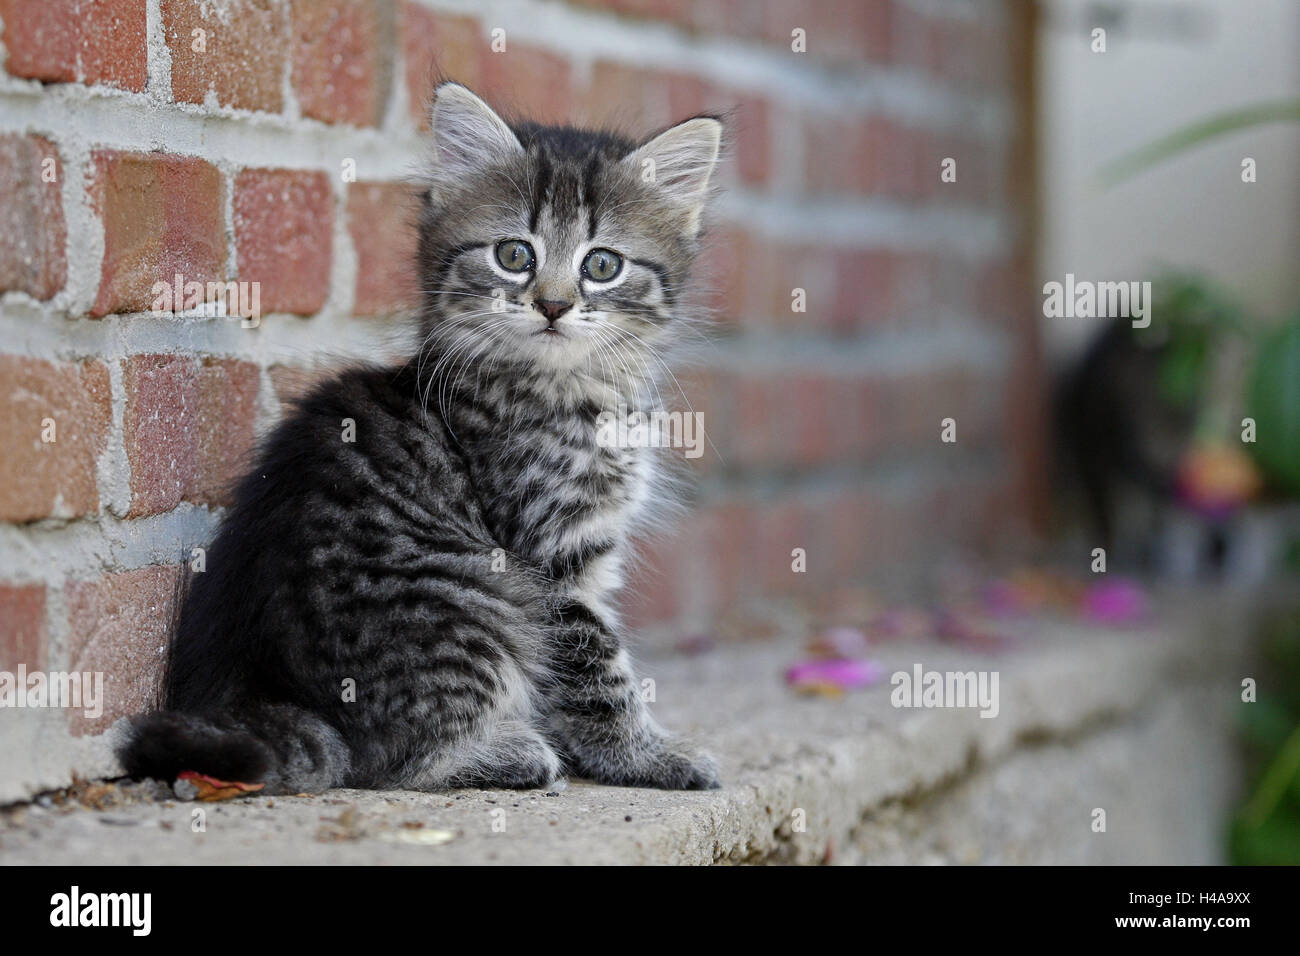 More poorly, house cat, young animal, sit, side view, animal, mammal, cat, pet, outside, animal child, kitten, striped, whole body, fur, softy, carefully, startled, brick wall, Stock Photo